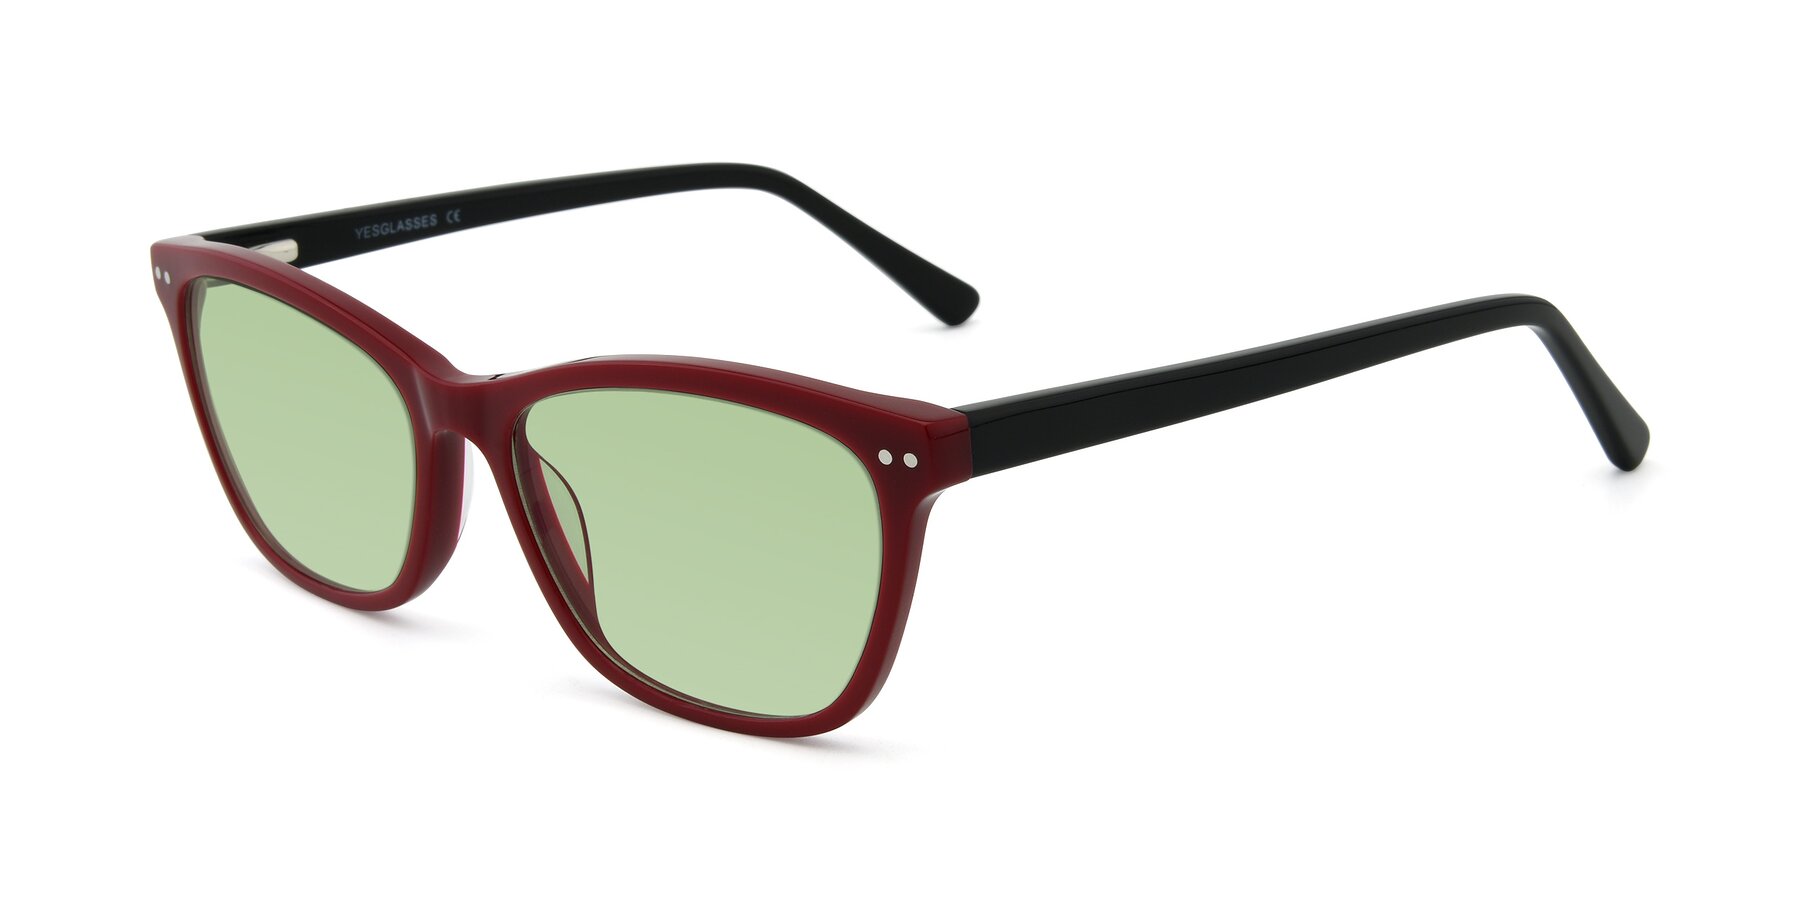 Angle of 17350 in Wine with Medium Green Tinted Lenses